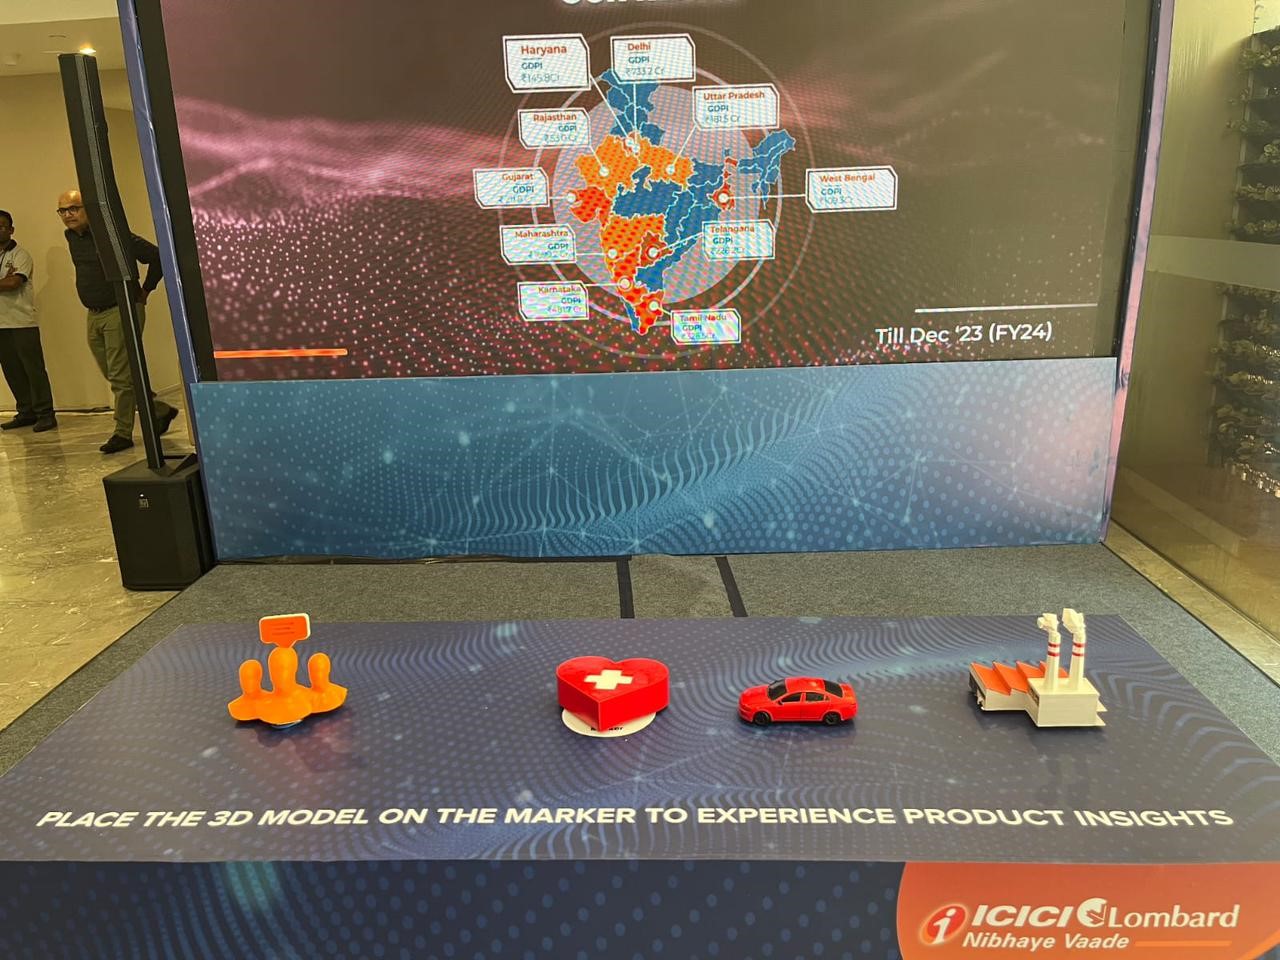 ICICI Lombard's Analyst Day, 2024 showcasing it's digital ecosystem with industry first initiatives